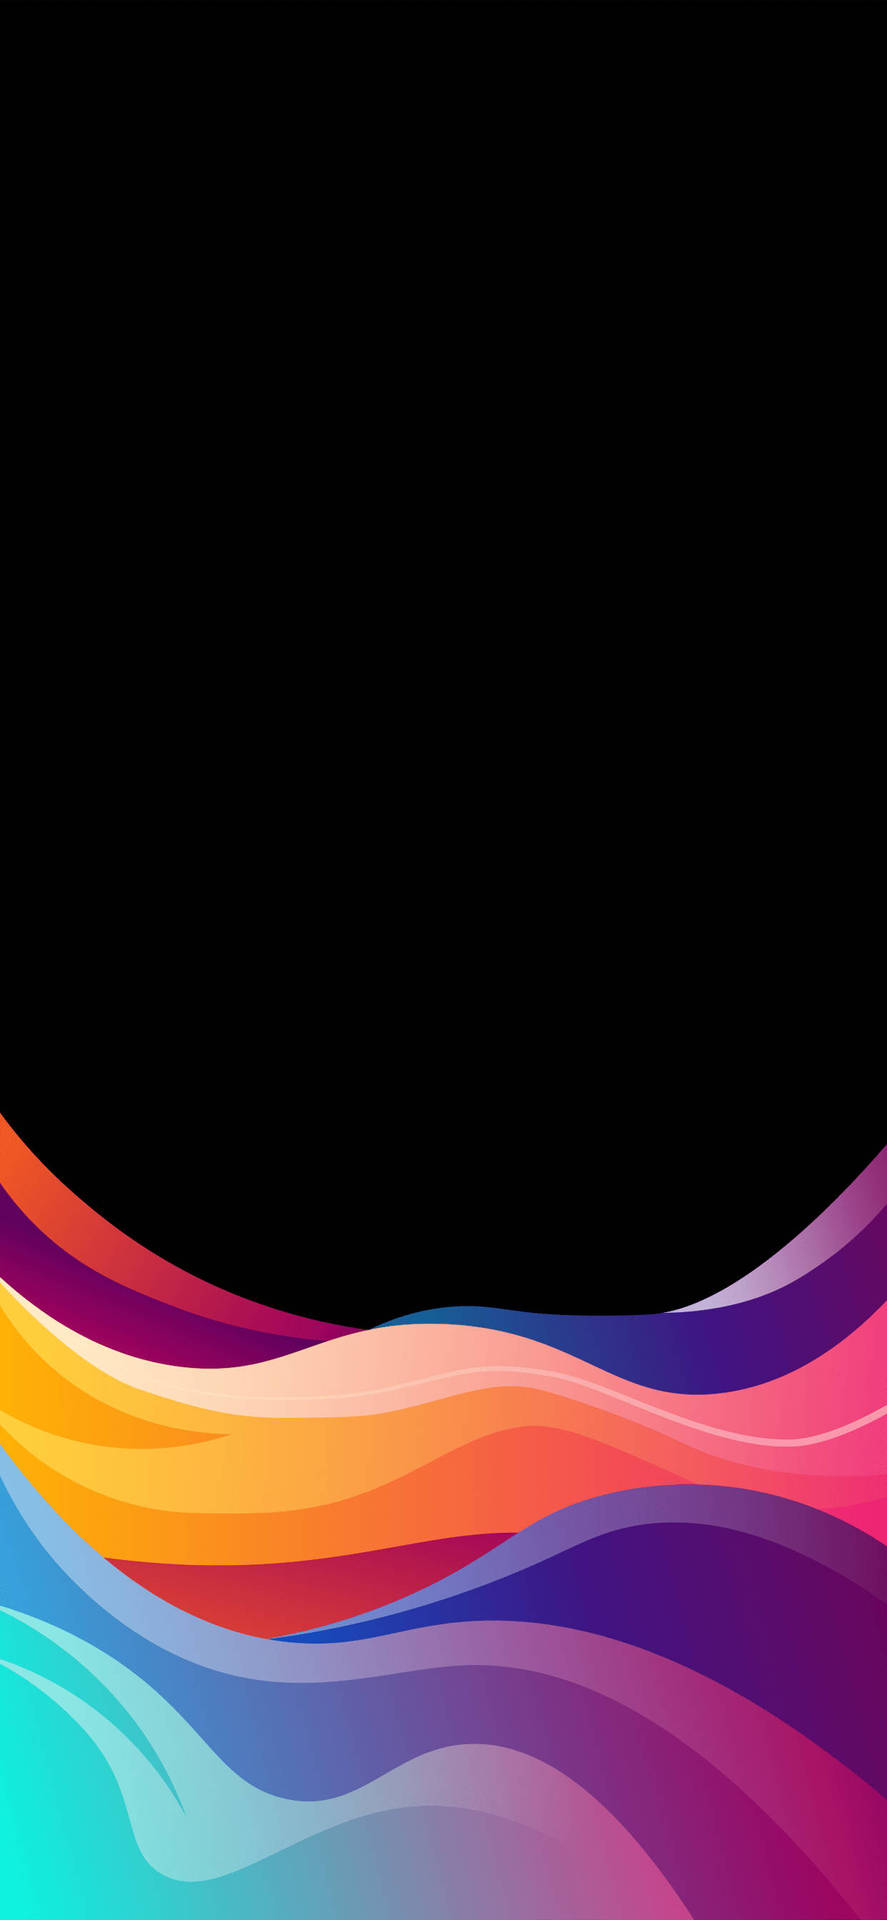 Pink Iphone Xr Colorful Wave Sturucture Wallpaper